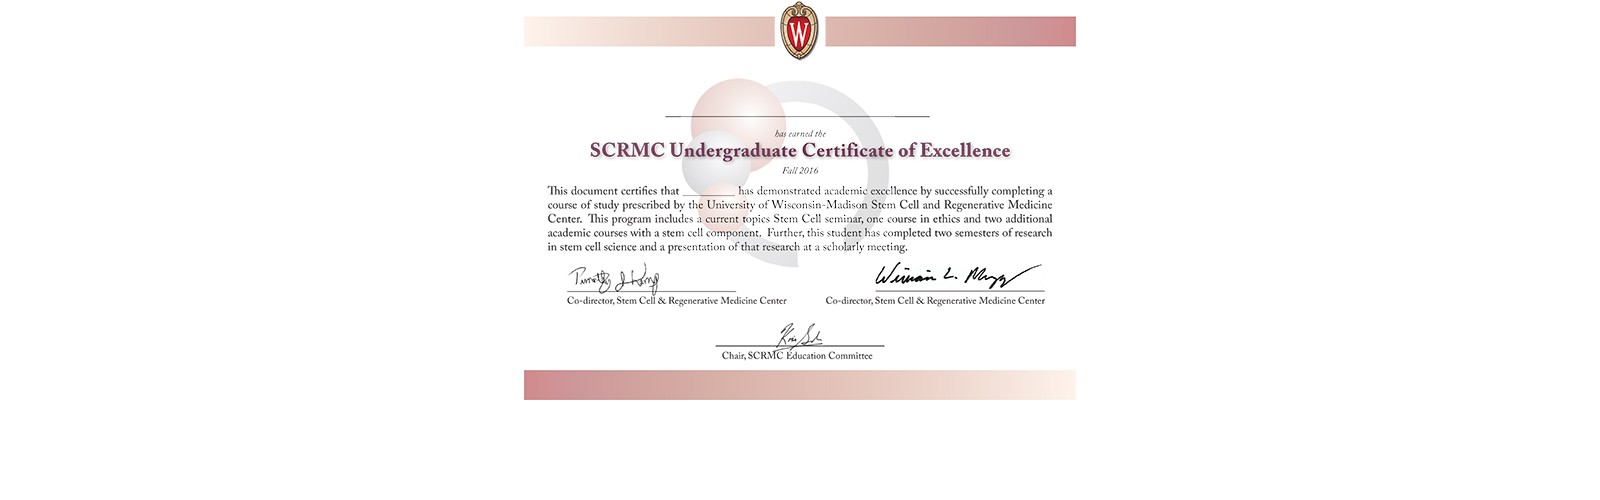 Undergraduate Certificate Of Excellence In Stem Cell Sciences